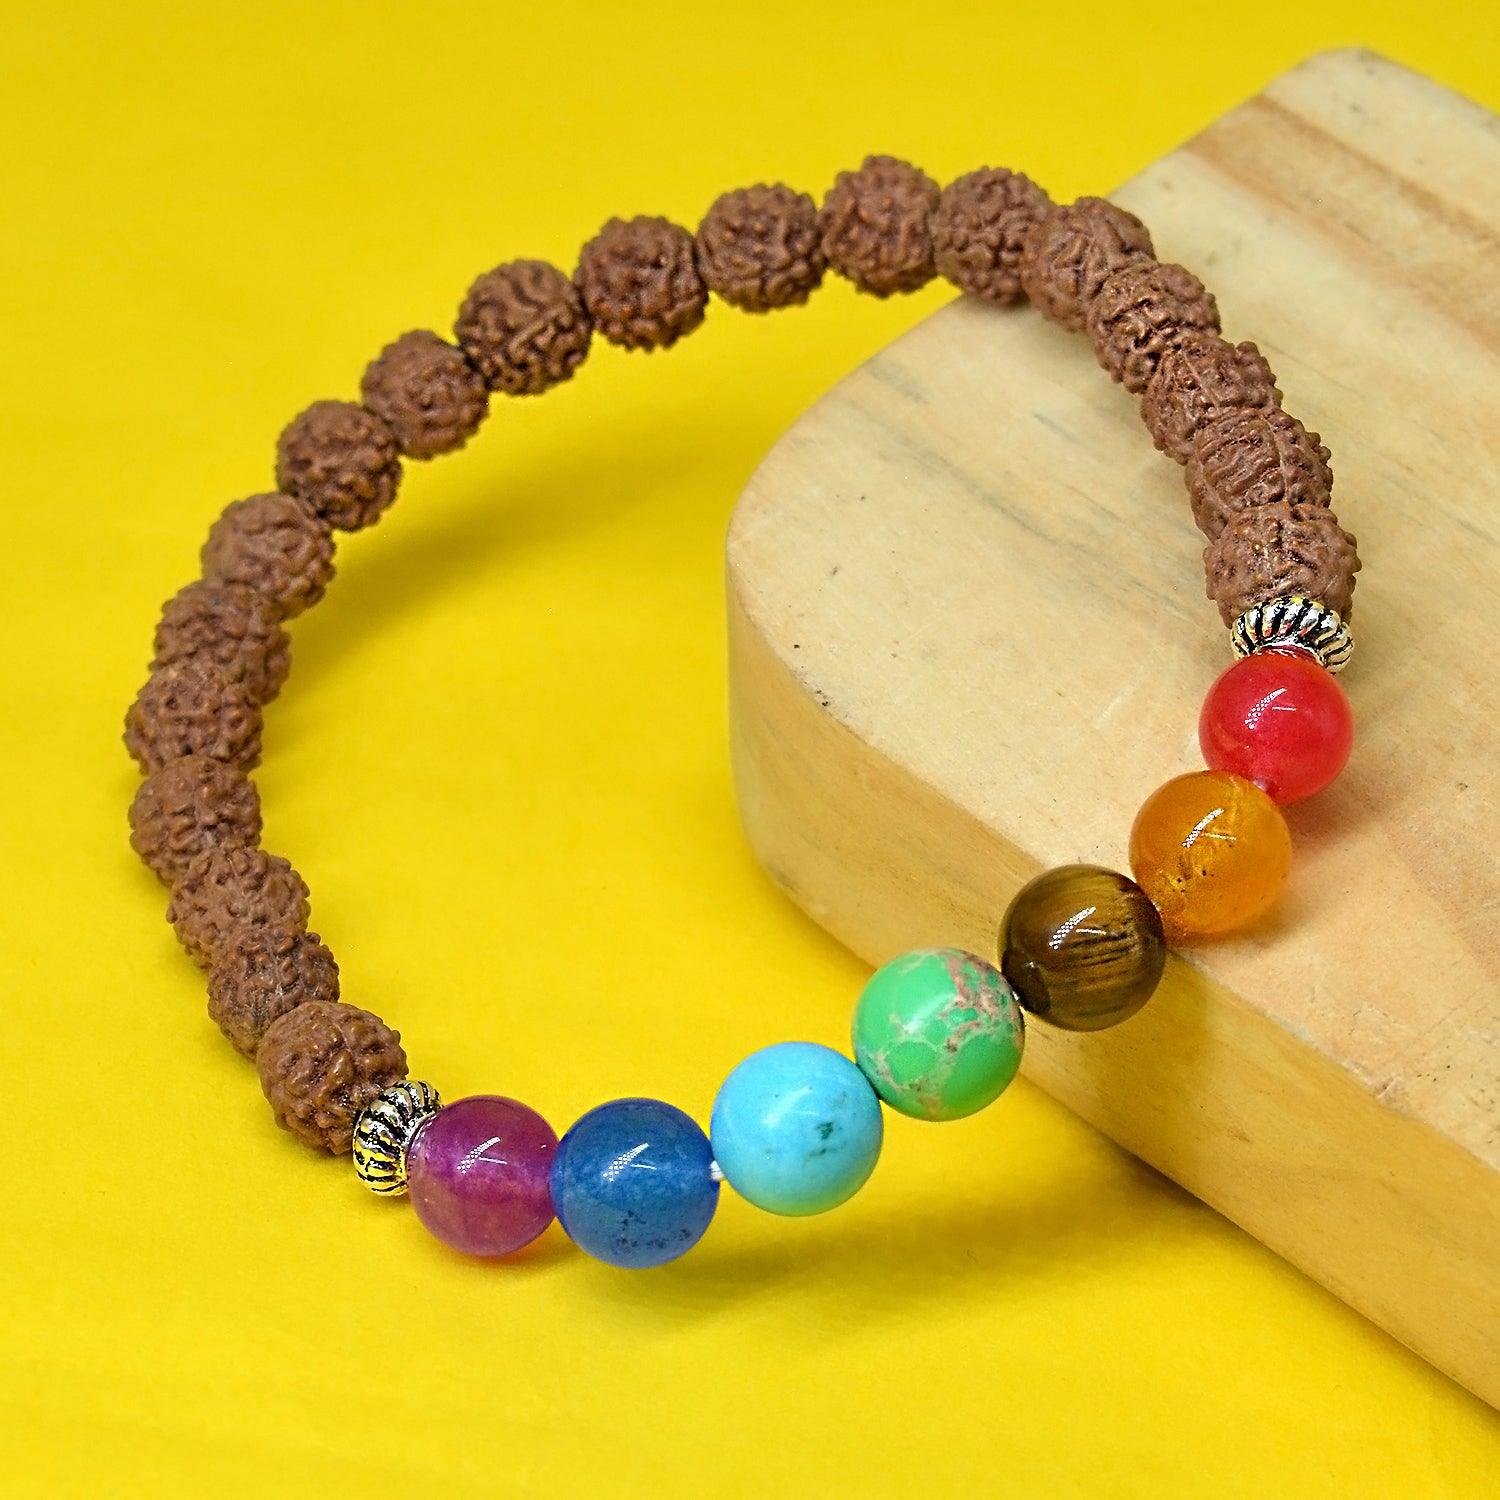 Colorful Natural Stone Buddha Bead Bracelet With 7 Chakra Energy And Tiger  Eye Chakra Pendant For Women From Vivian5168, $1.74 | DHgate.Com